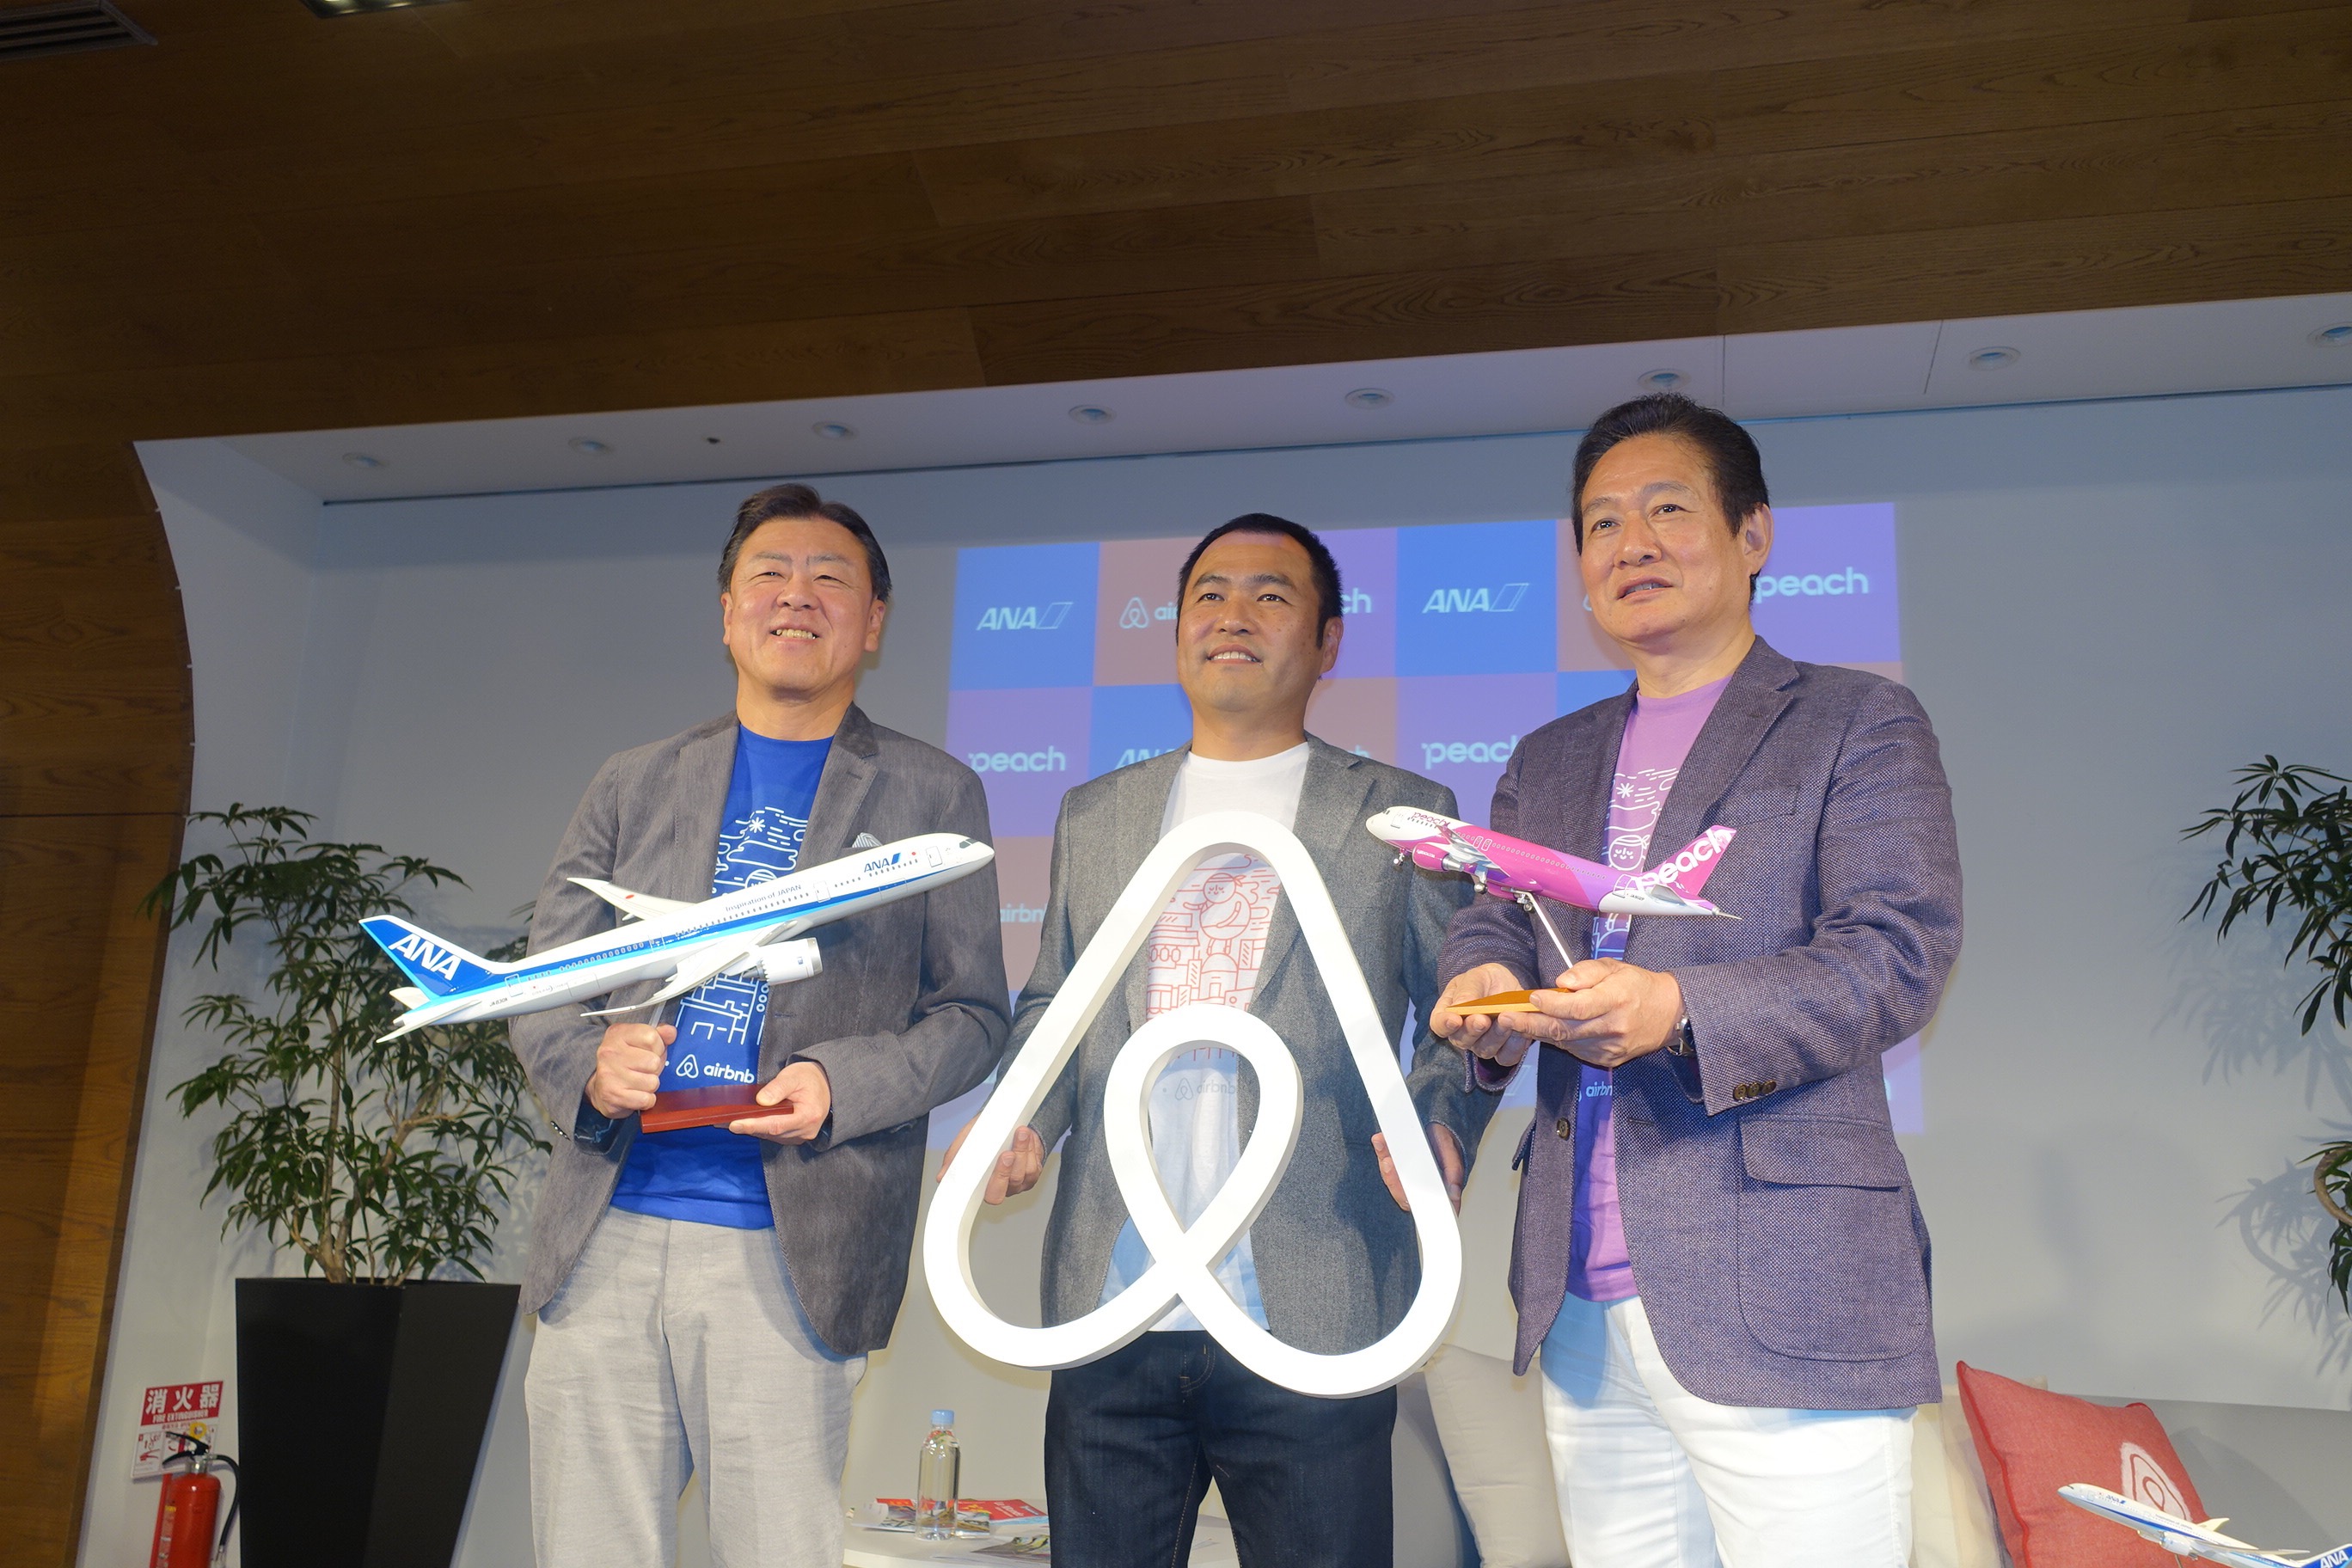 ANA, Peach and Airbnb form a partnership to create new travel styles for the Japanese